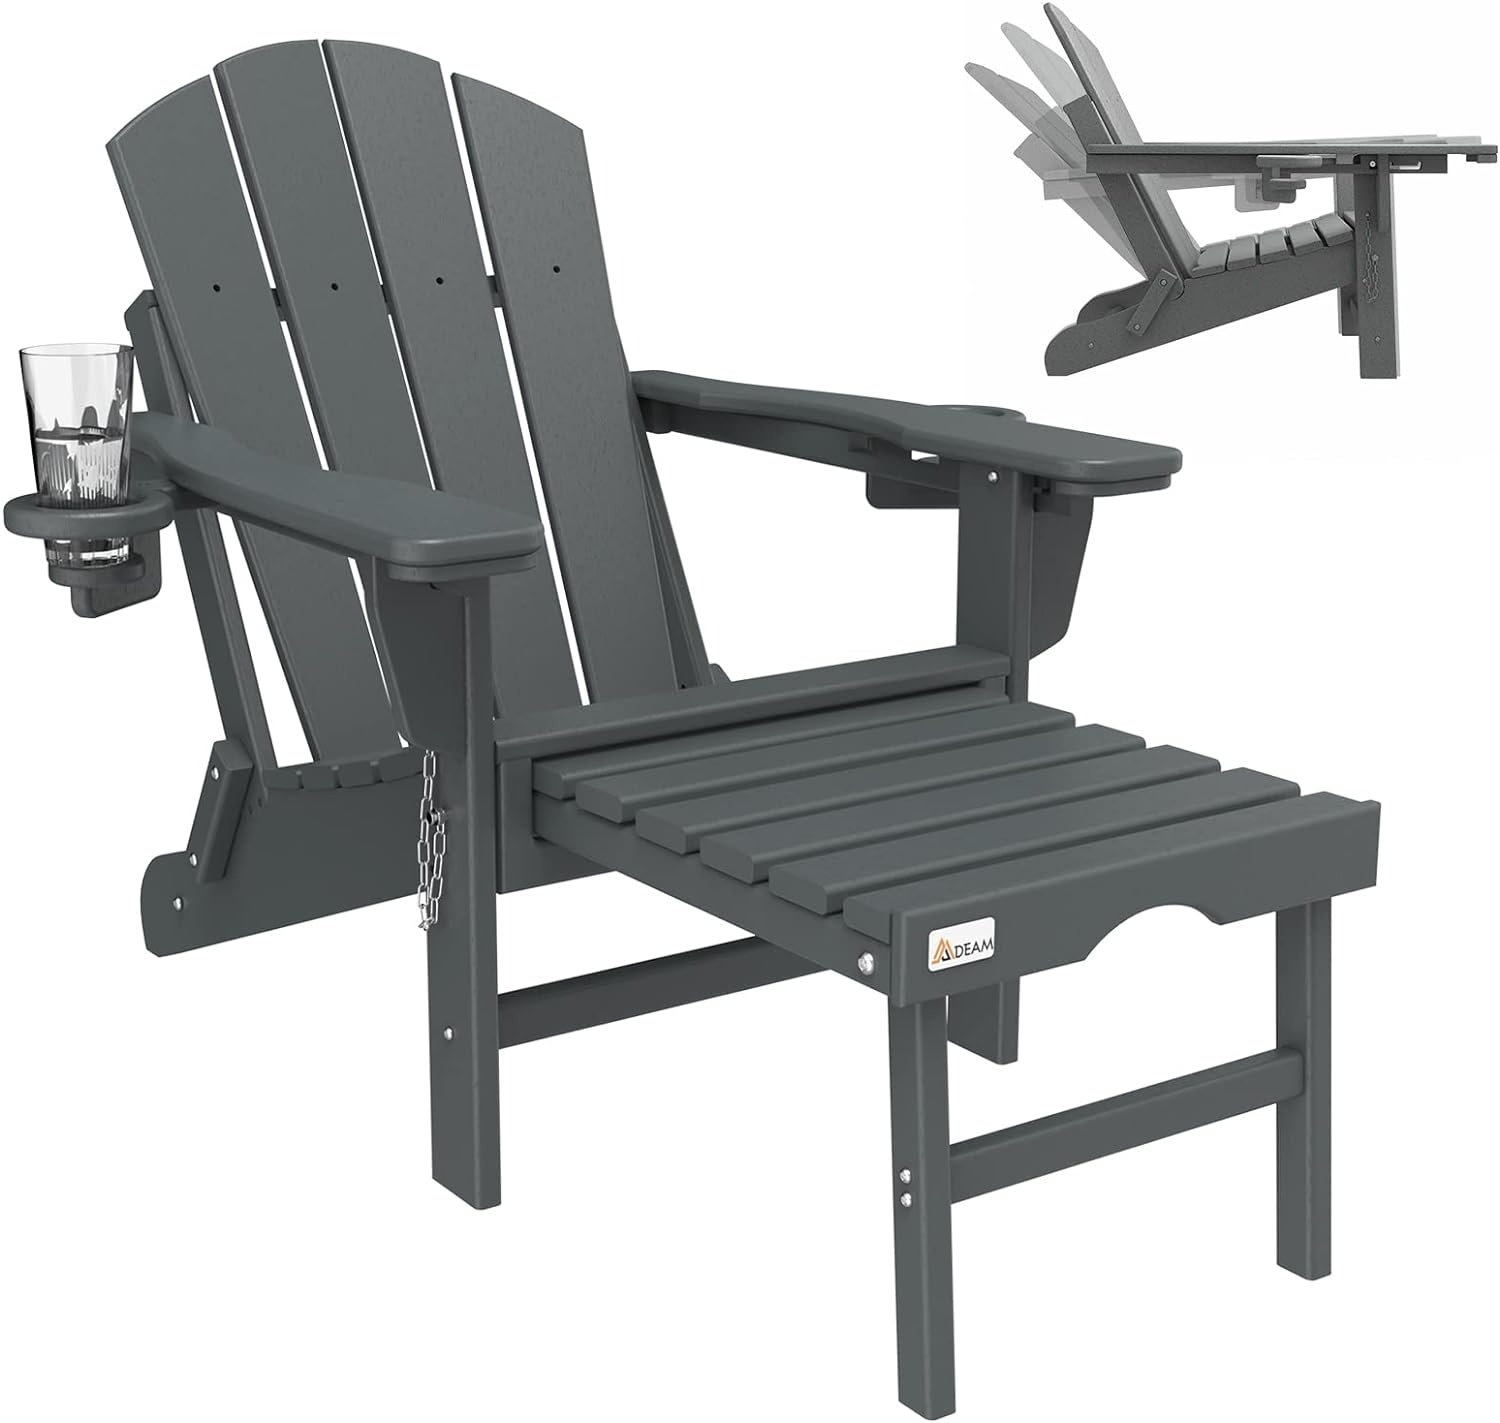 ⏰Last Day Clearance Sale $29⛱️Mdeam Folding Outdoor Adirondack Chairs Weather Resistant for Patio